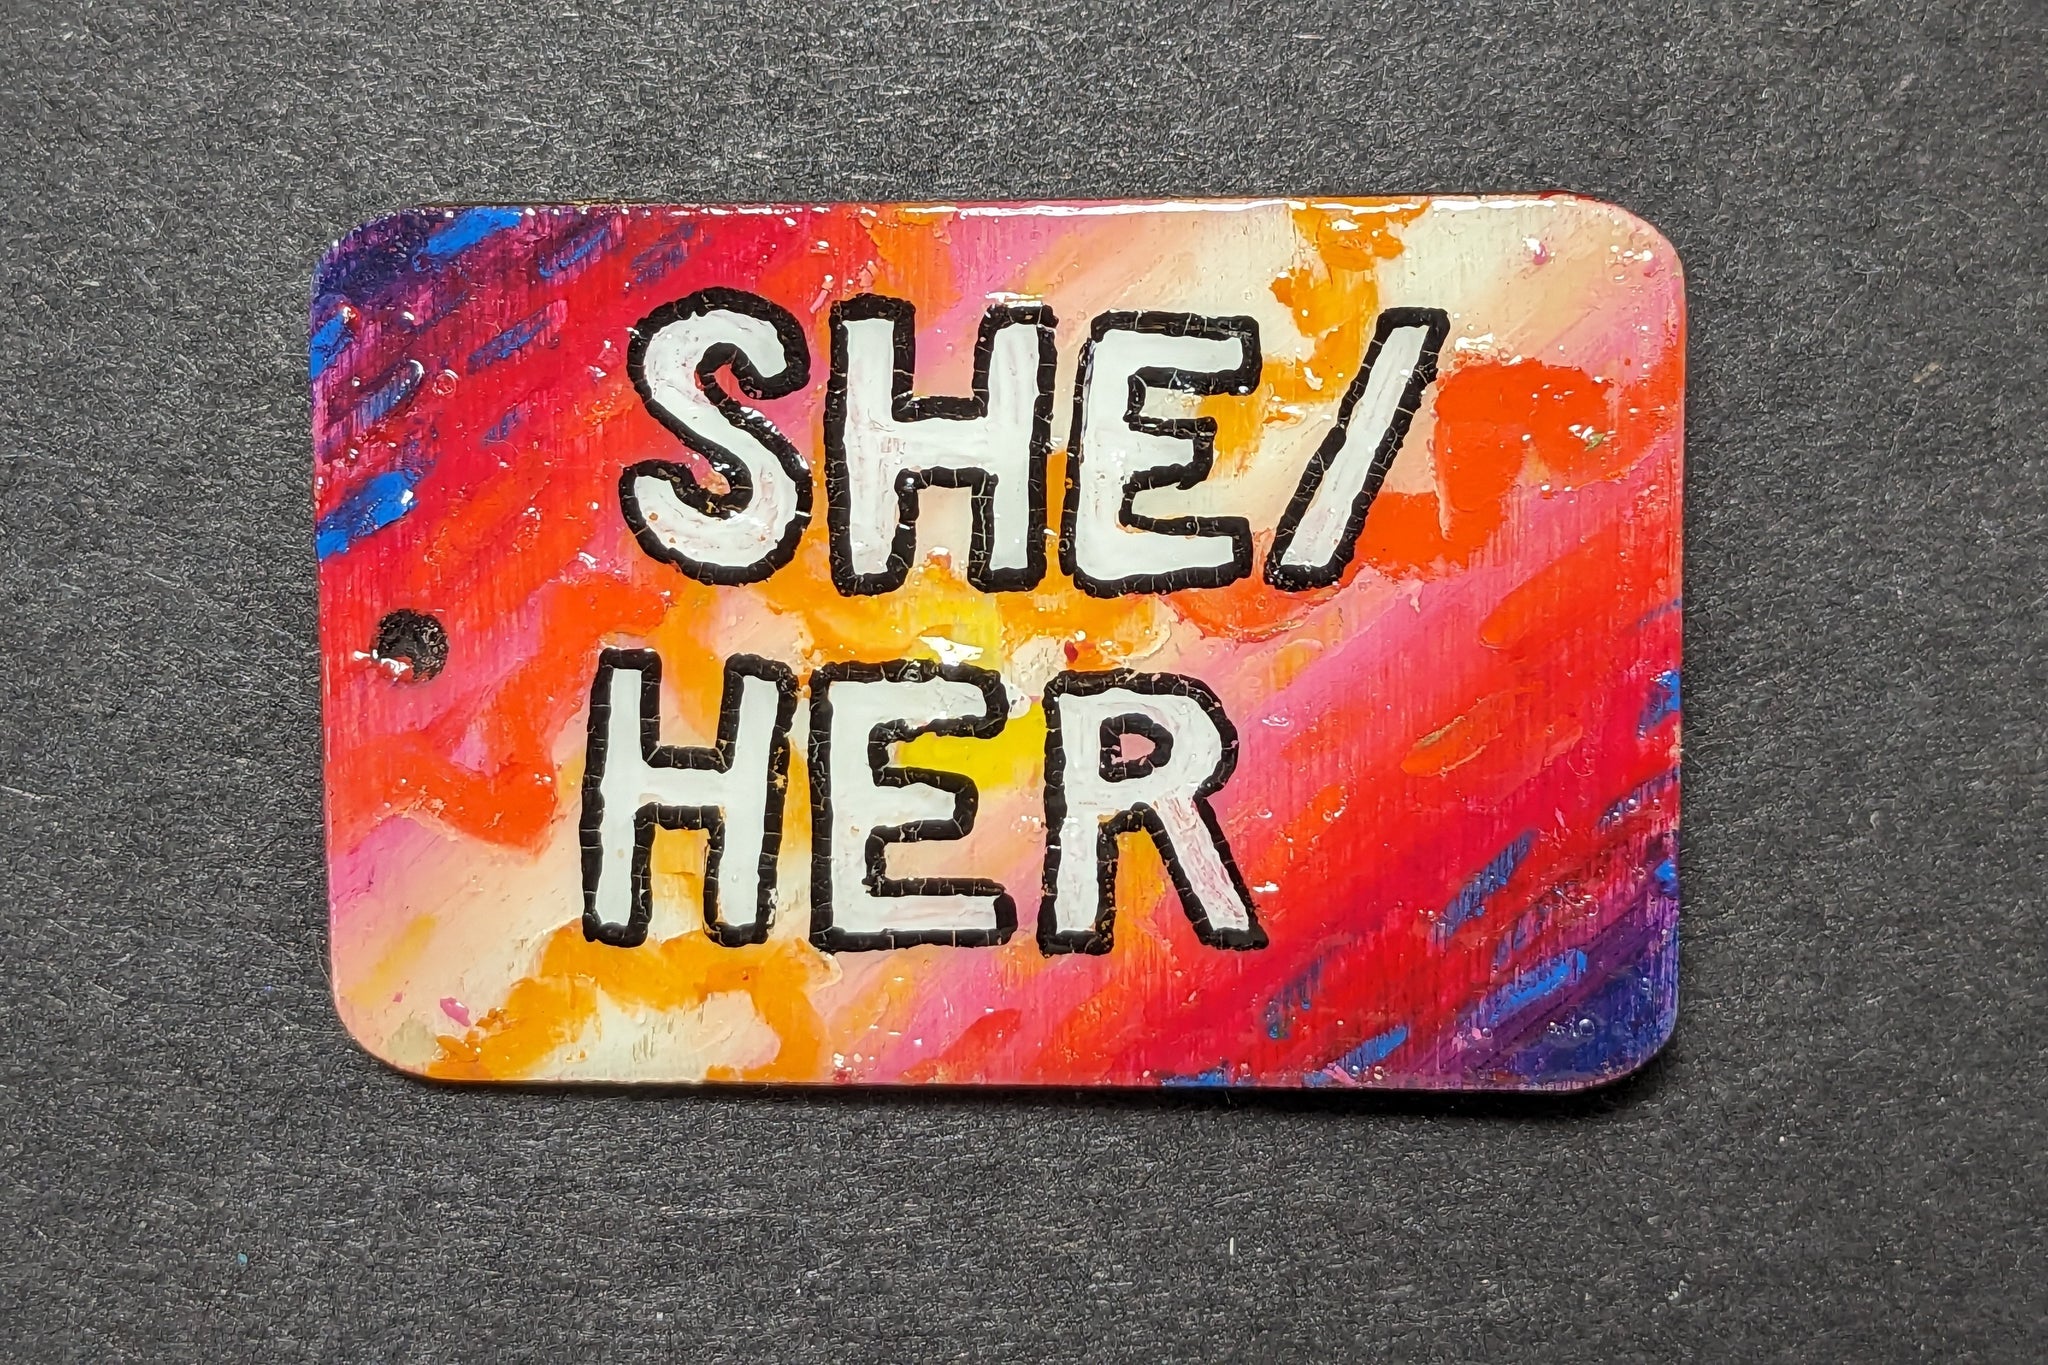 "She/Her" Ready-Made Synesthesia Pin